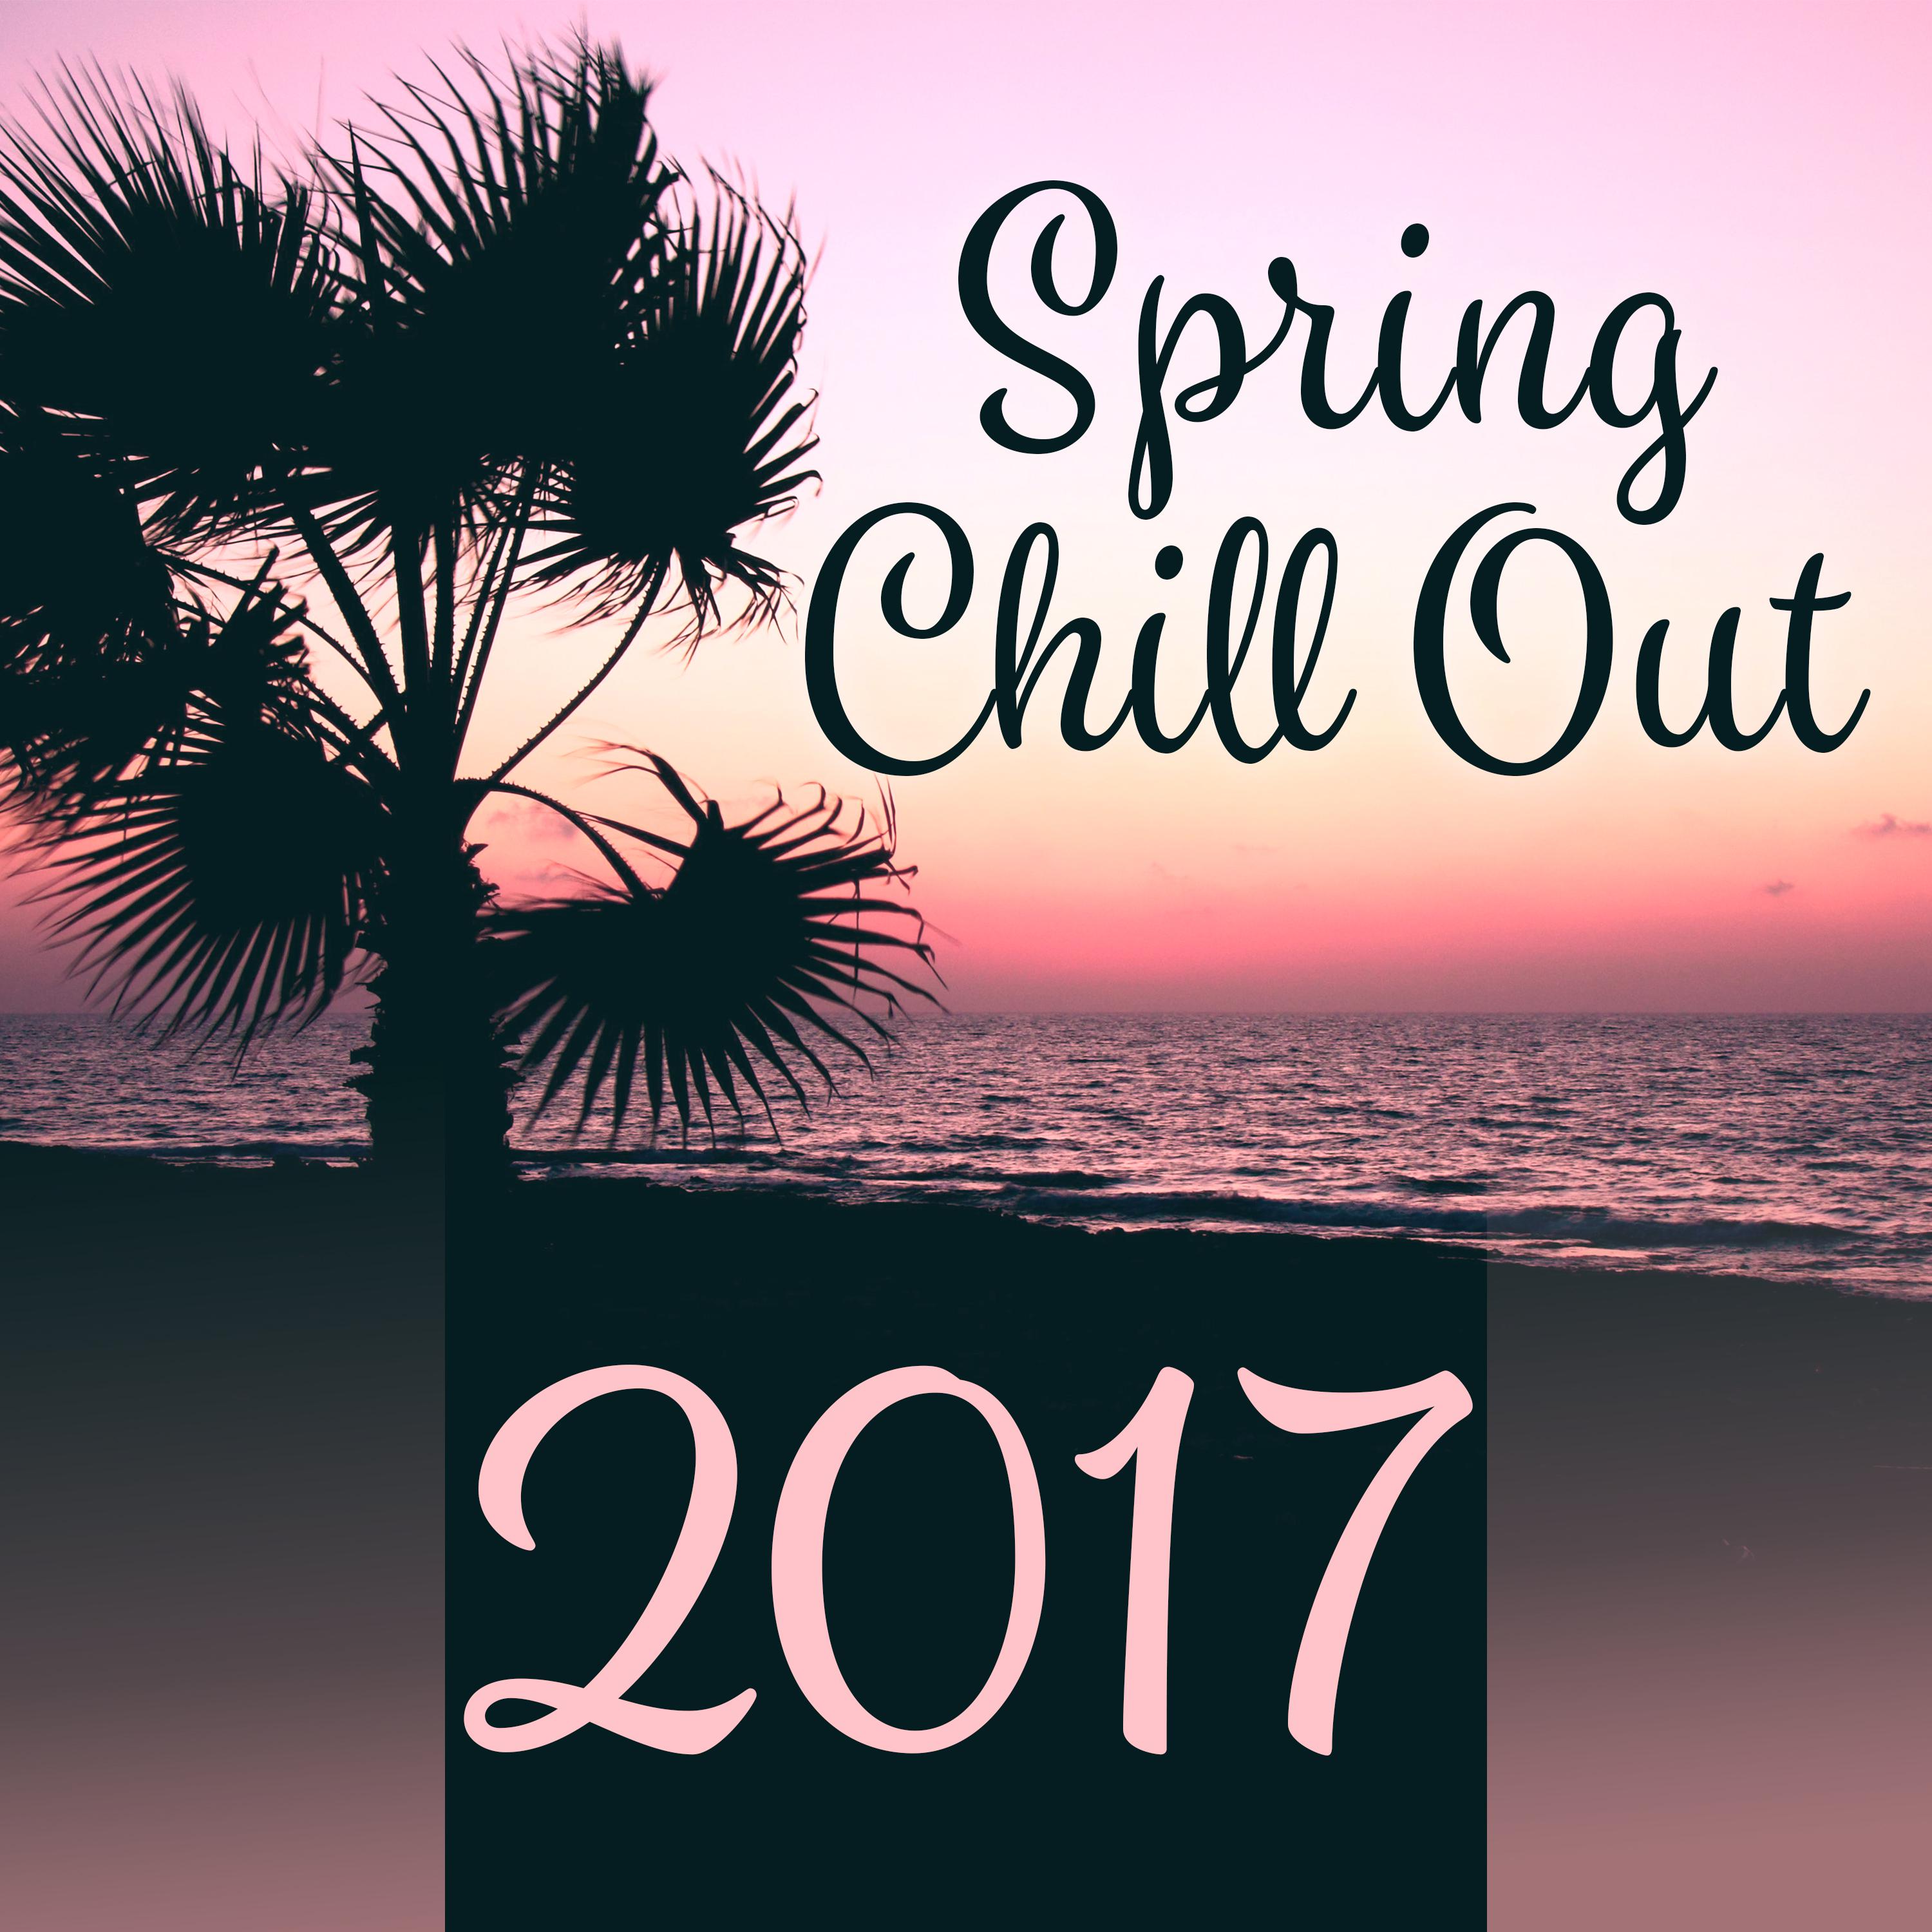 Spring Chill Out 2017 – Deep Chillout Sounds, Fresh Hits of Chil Out 2017